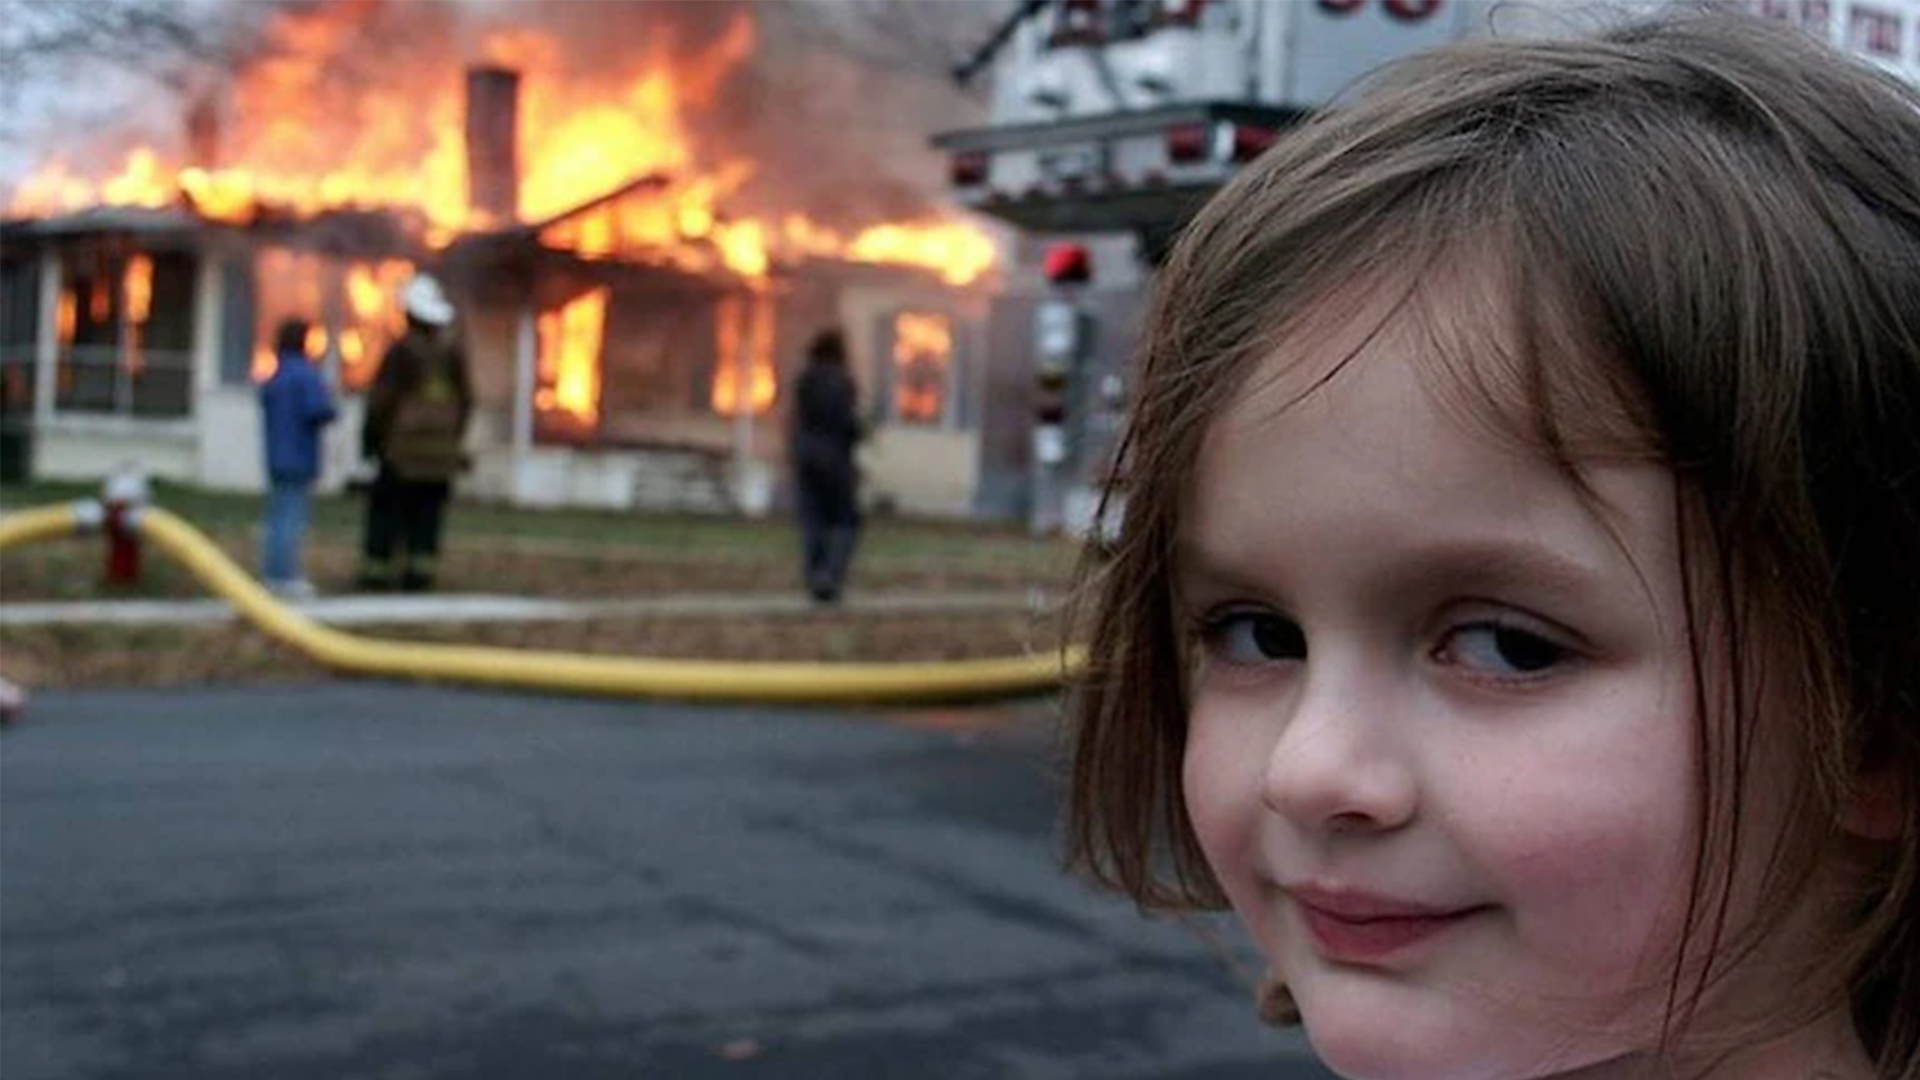 young girl smirking at camera while house burns in background